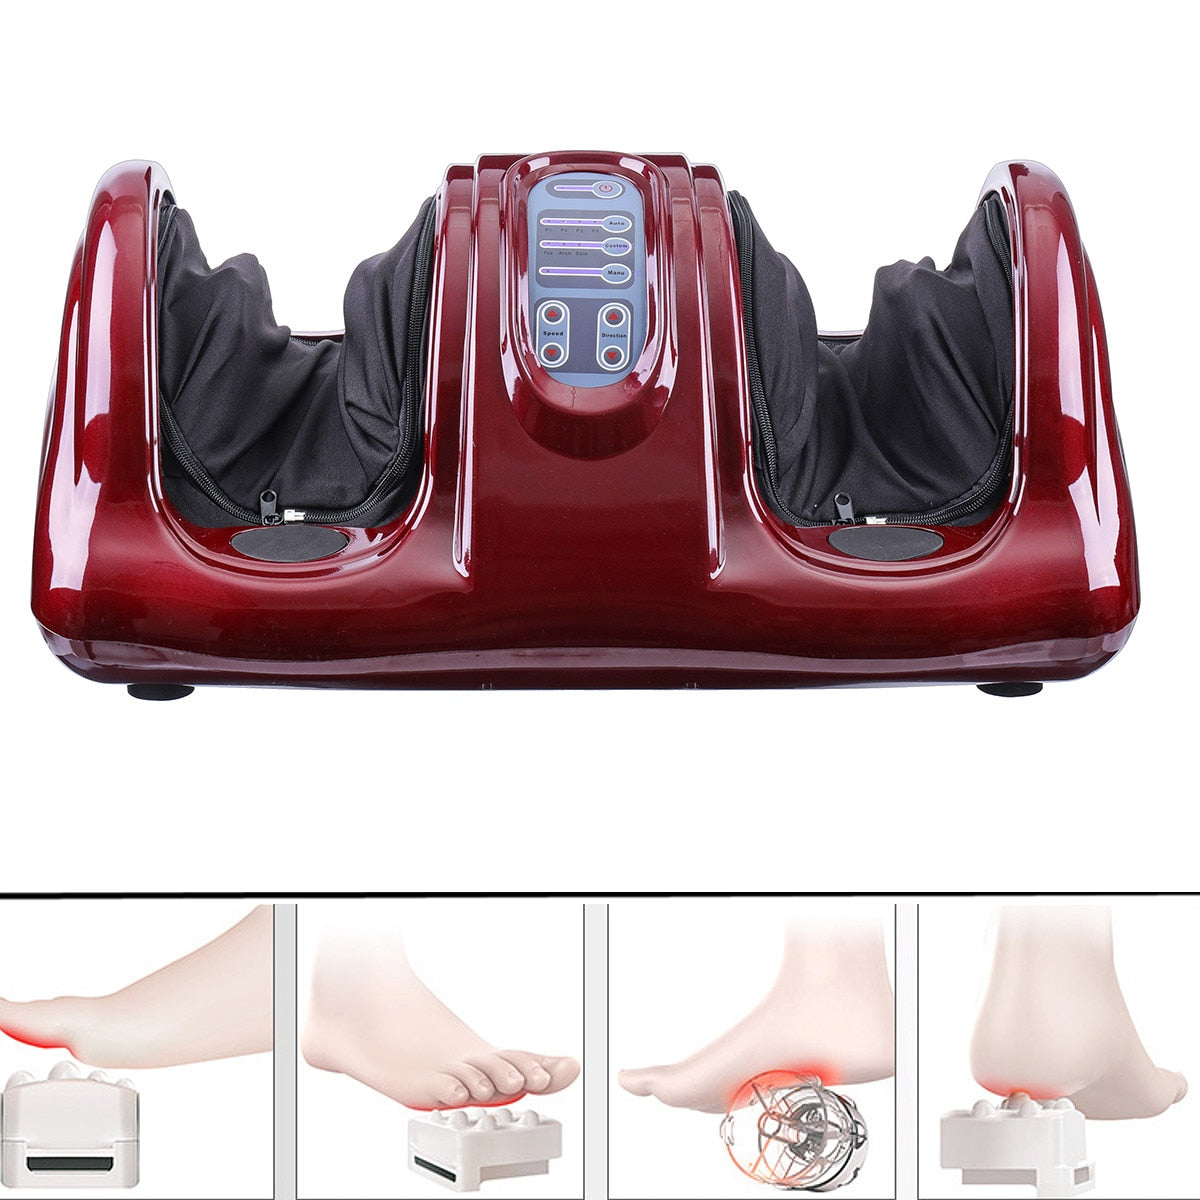 All-in-One 220V Foot Massager - Solutiverse